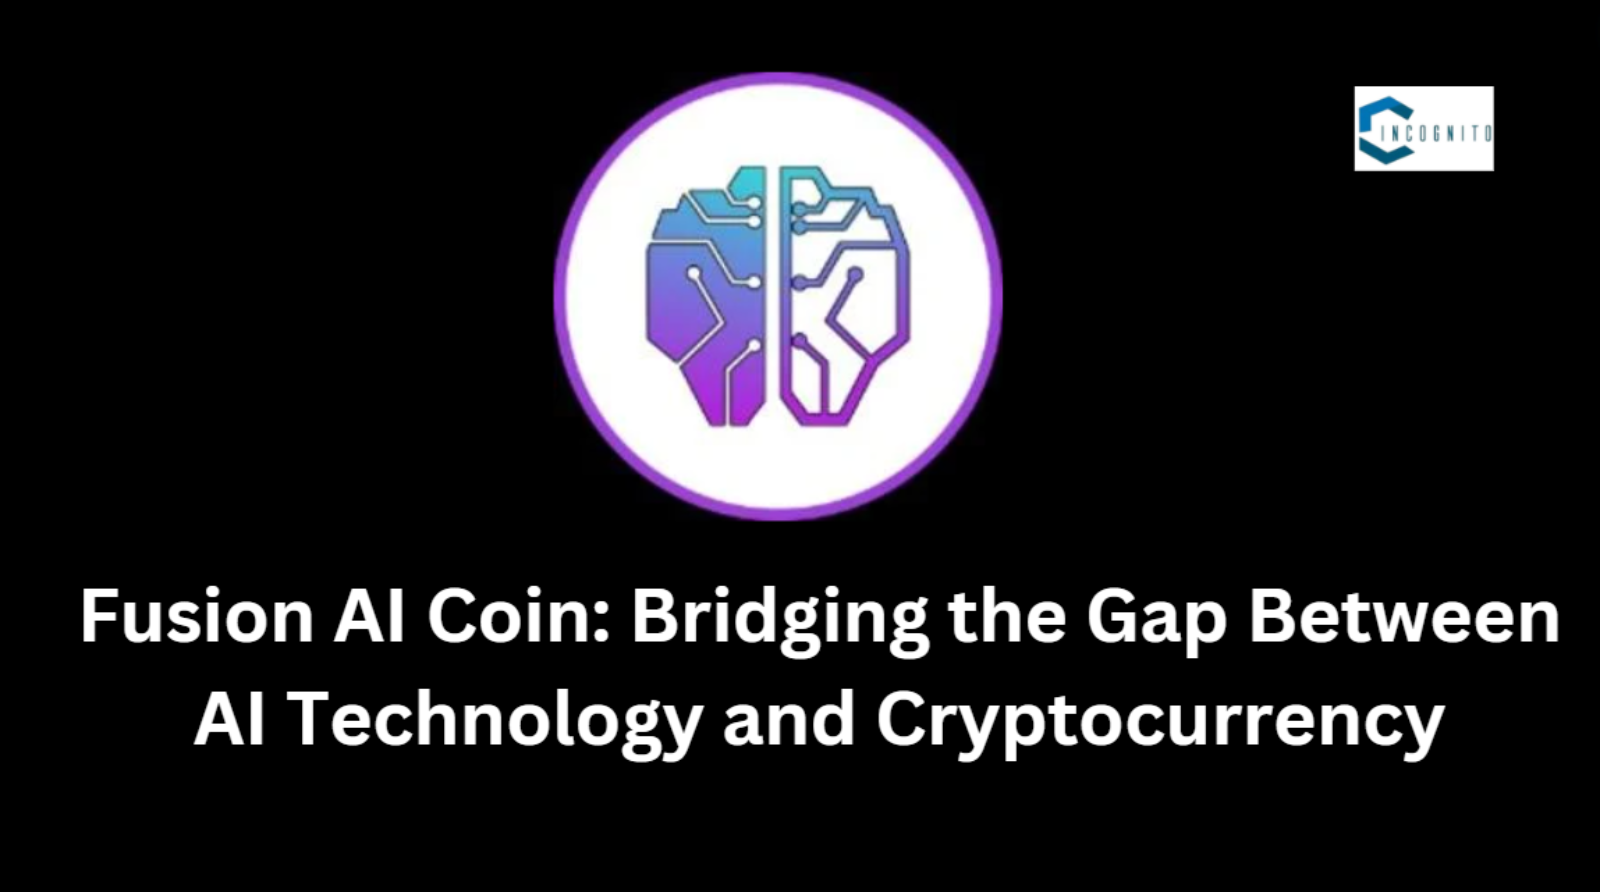 Fusion AI Coin: Bridging the Gap Between AI Technology and Cryptocurrency